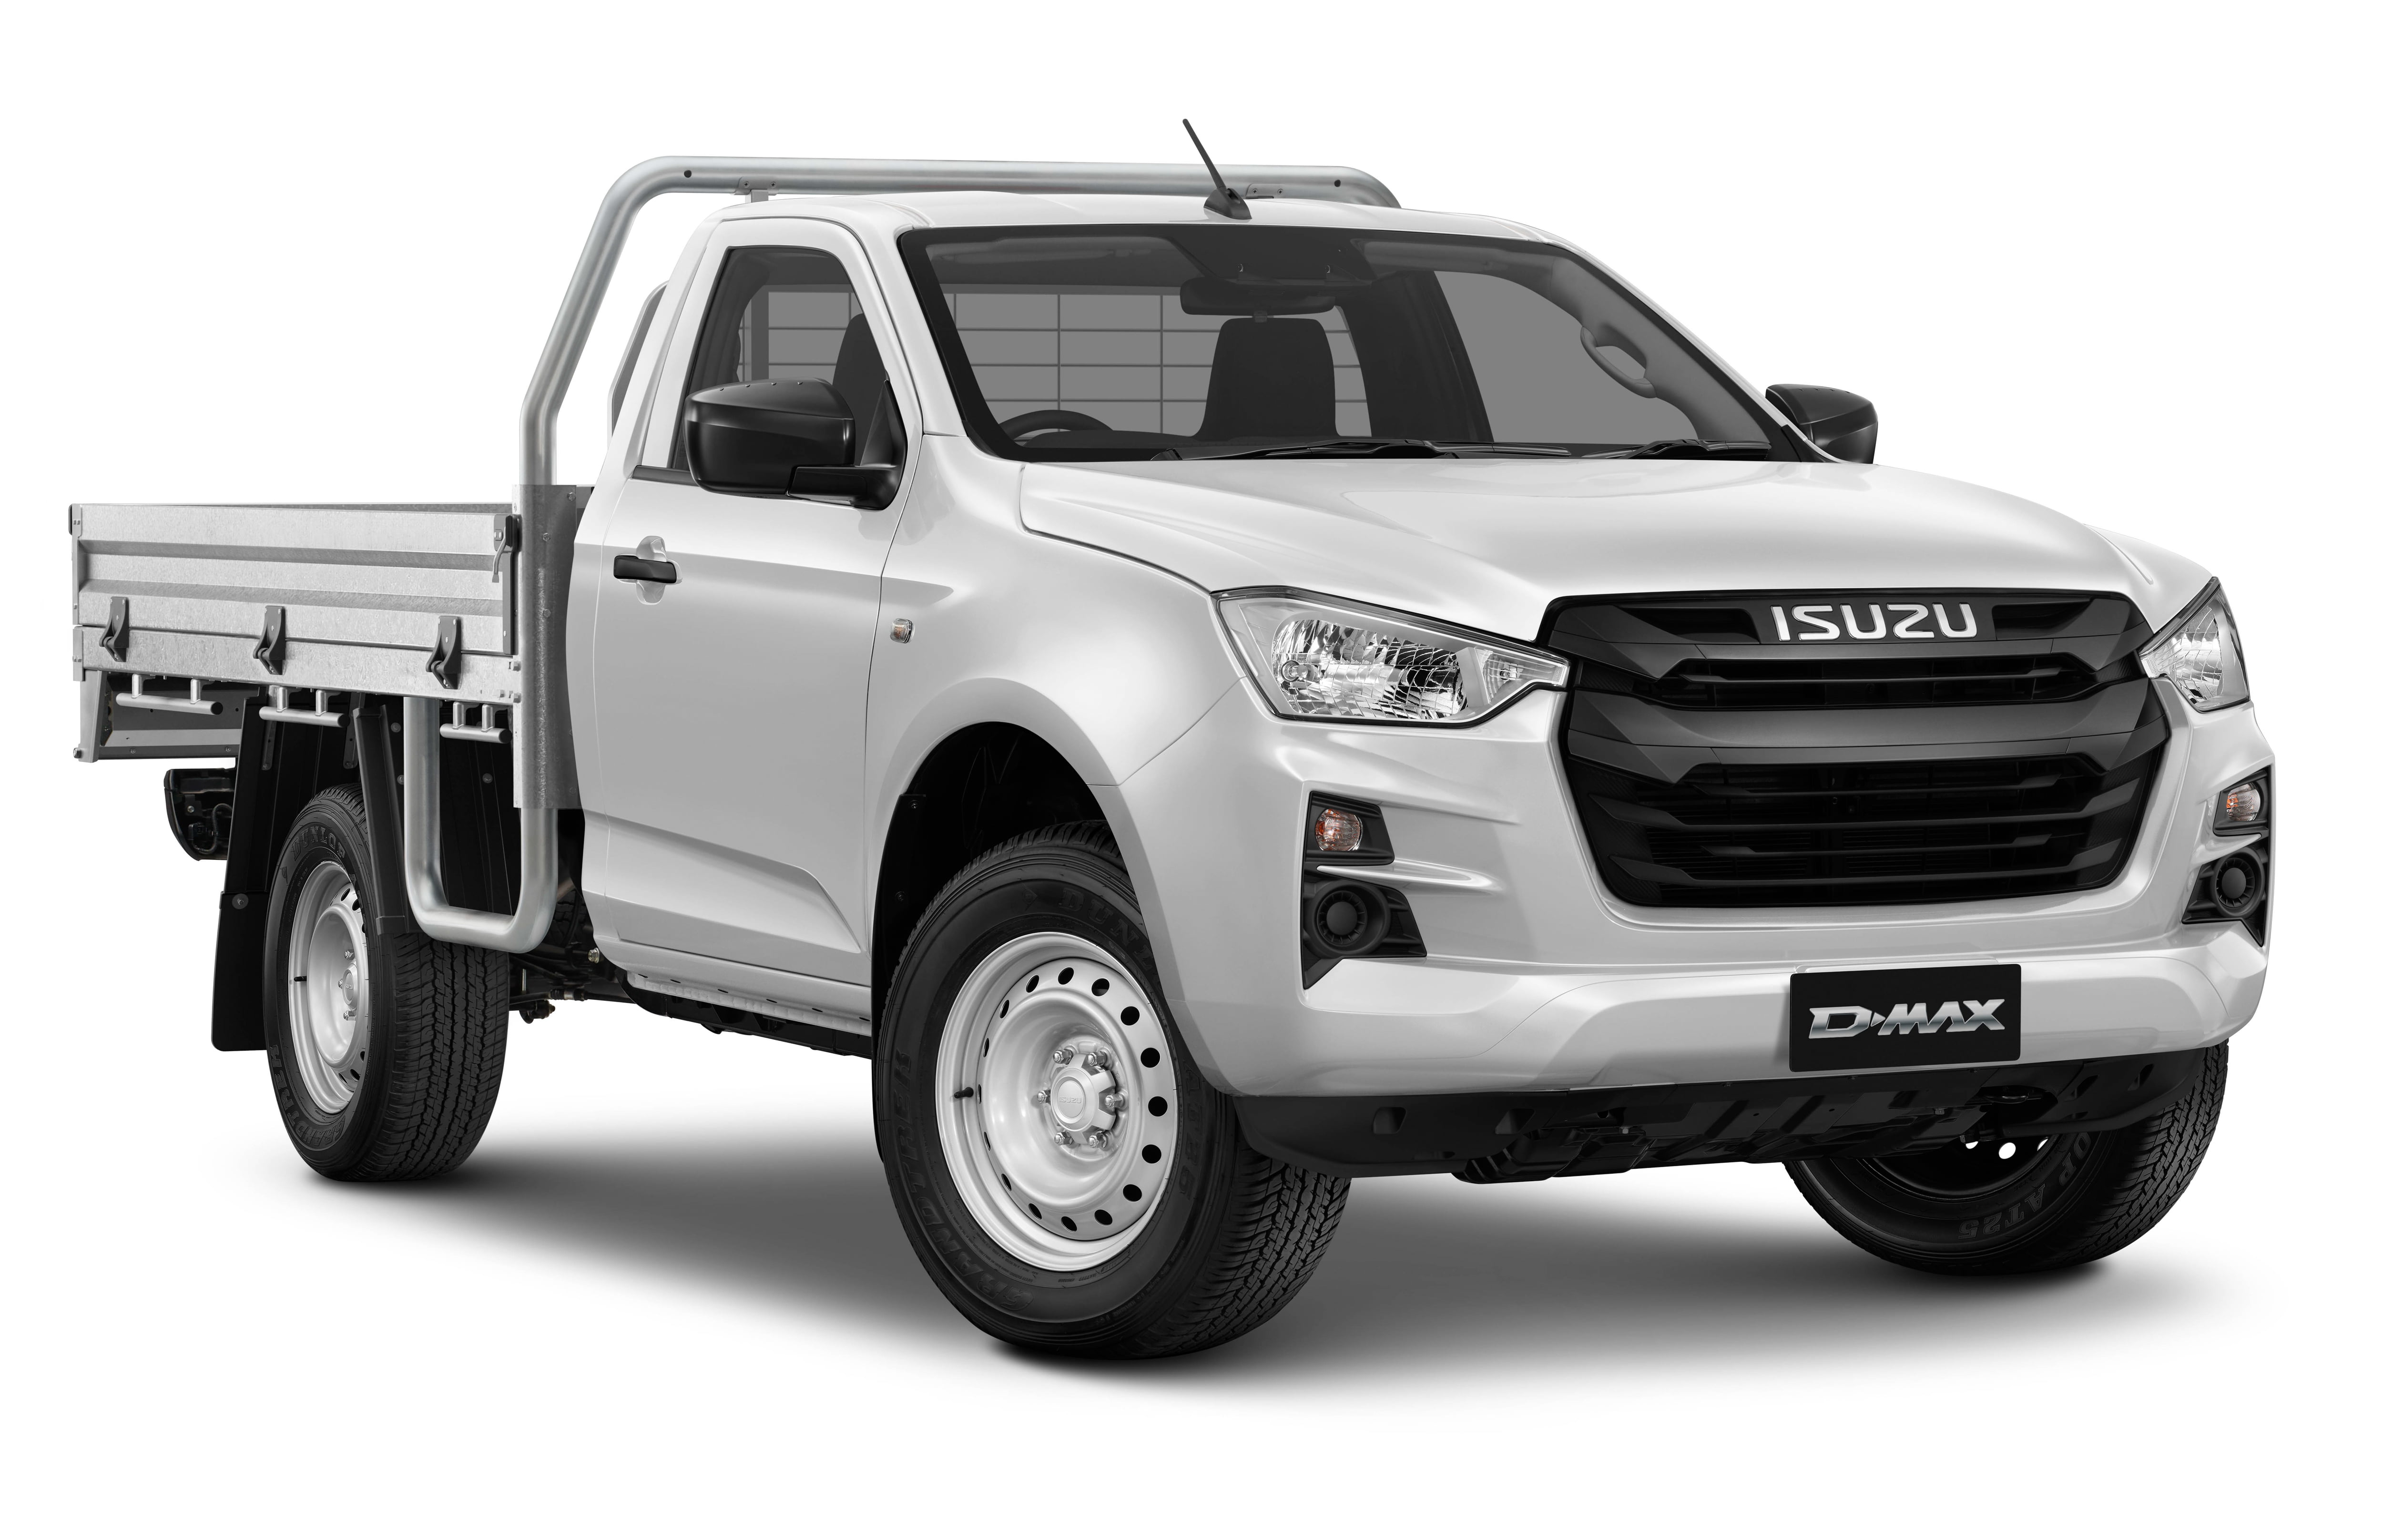 23MY ISUZU D-MAX SX SINGLE CAB CHASSIS with Heavy Duty Steel Tray Mineral White.